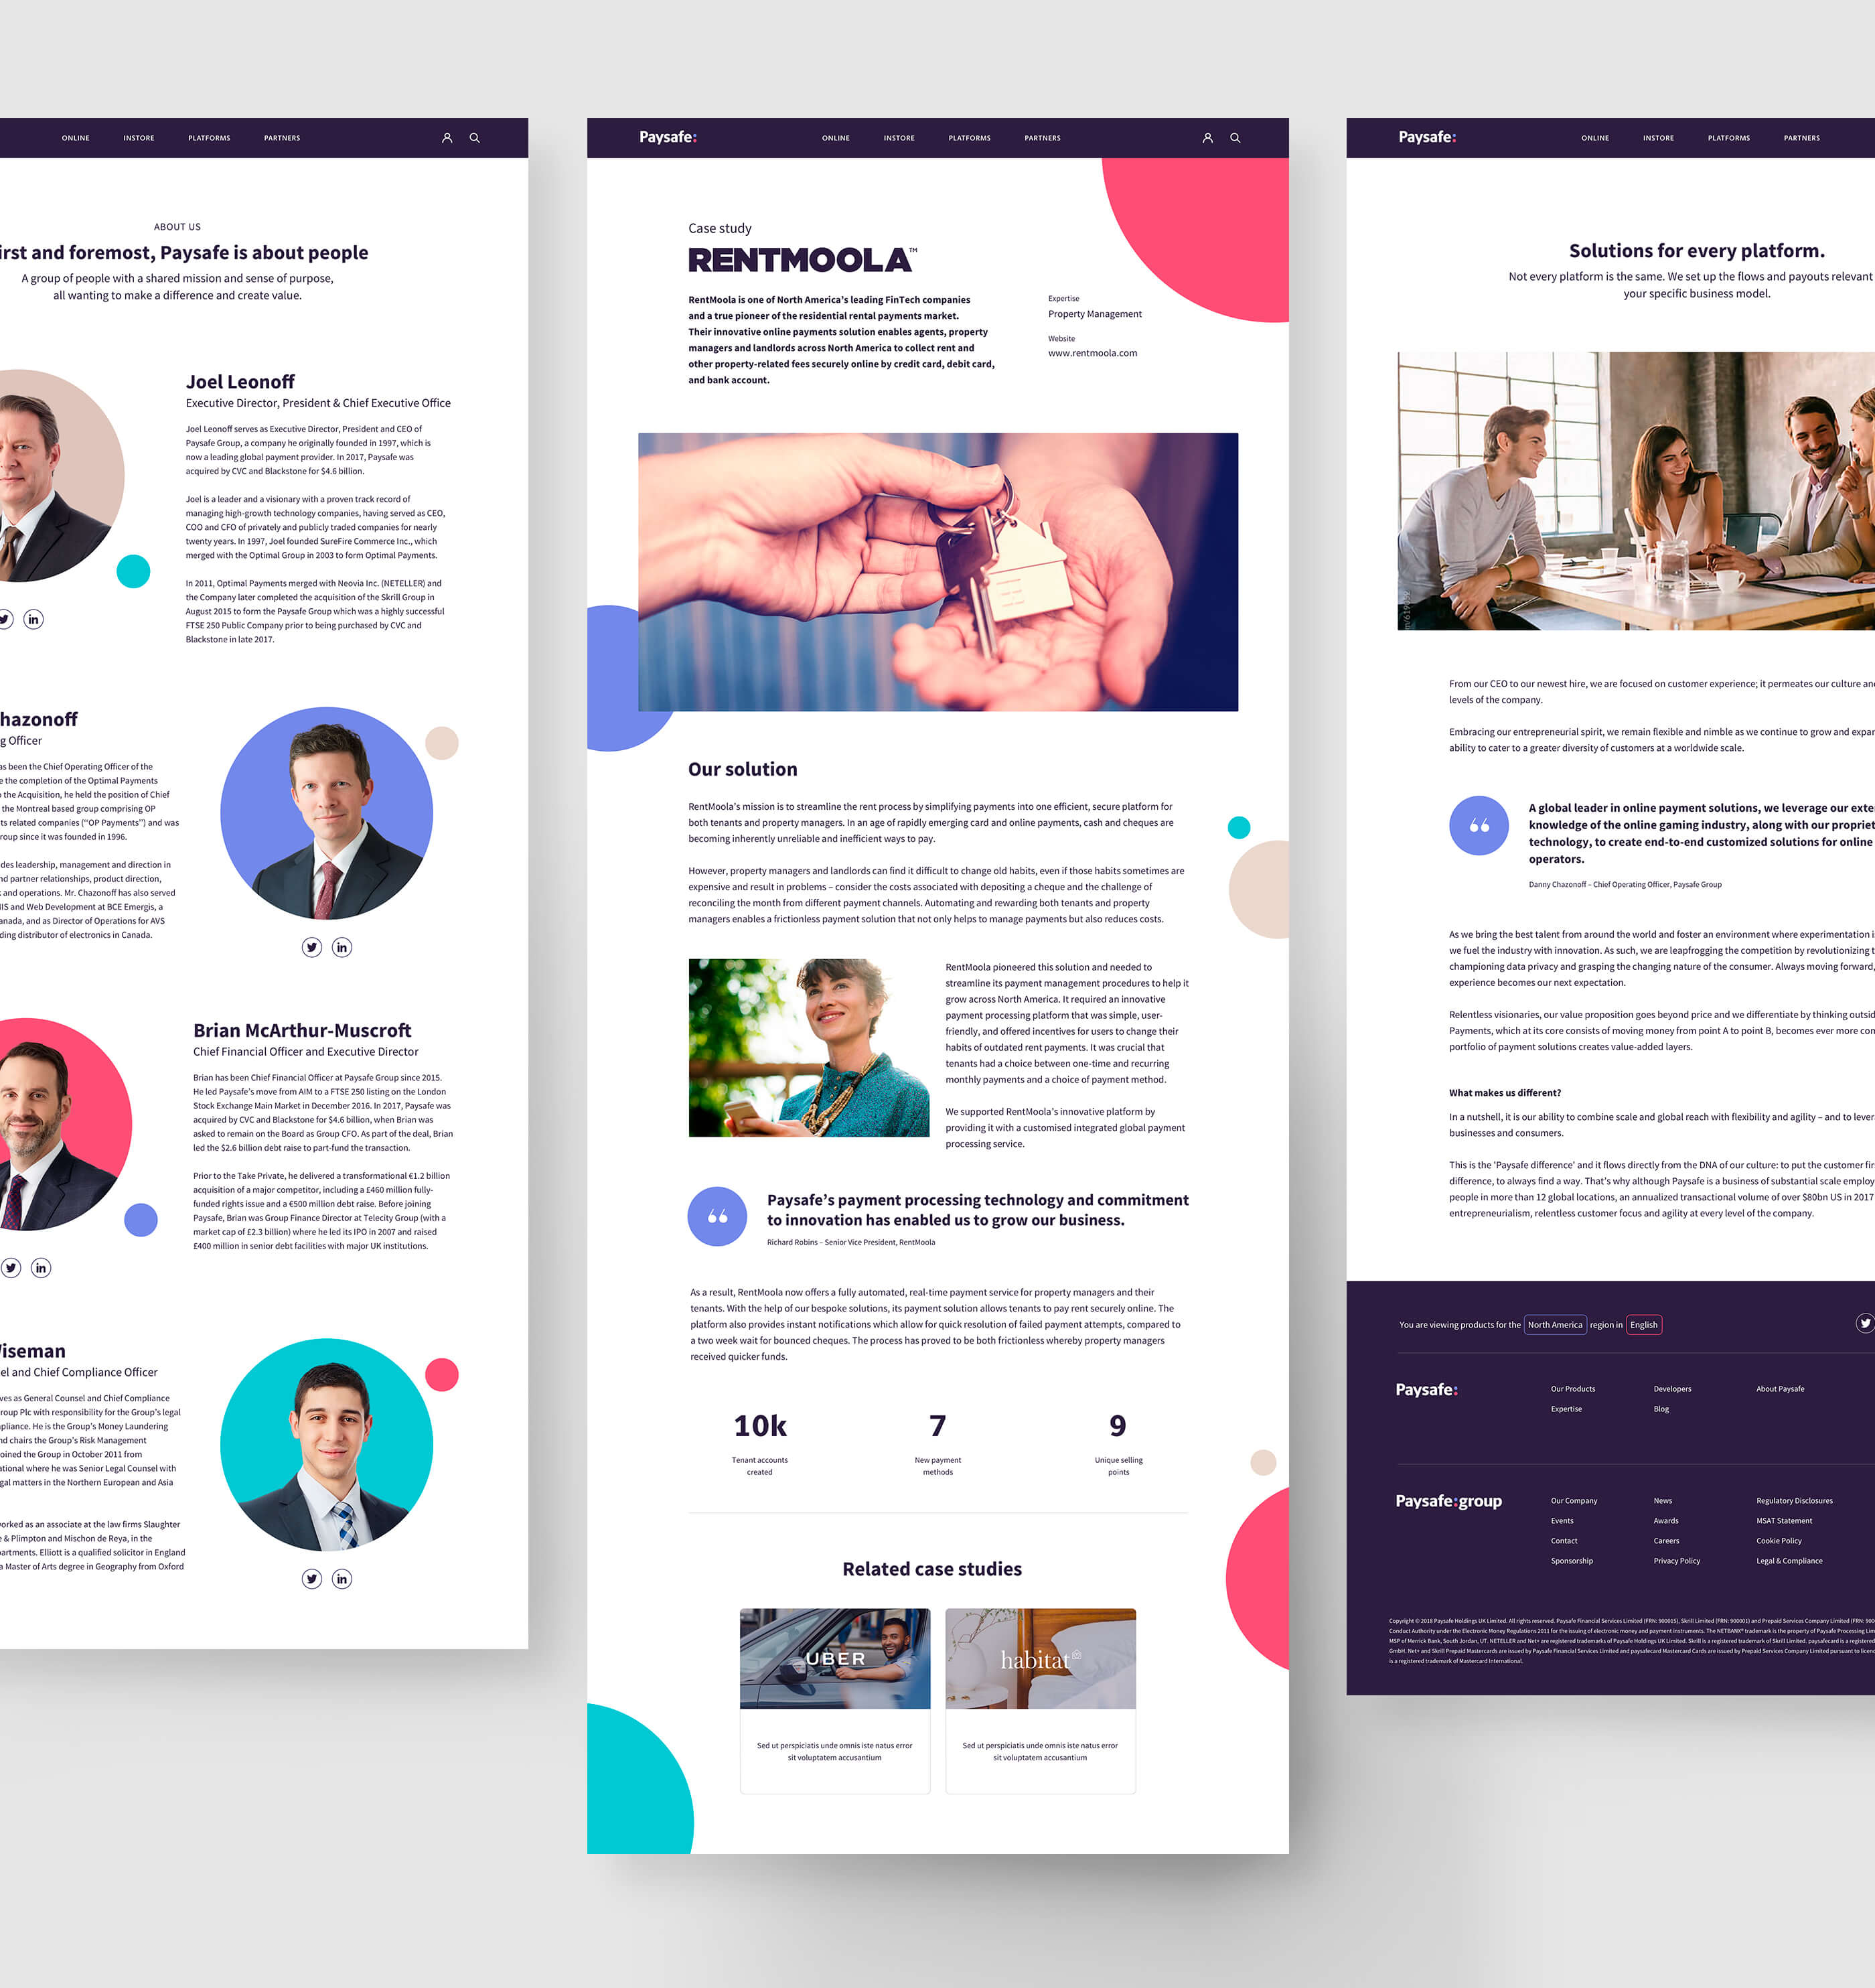 Three webpage designs from the 'About Us' section of the site, featuring key employee bio's, a Rentmoola client case study page and a press release page